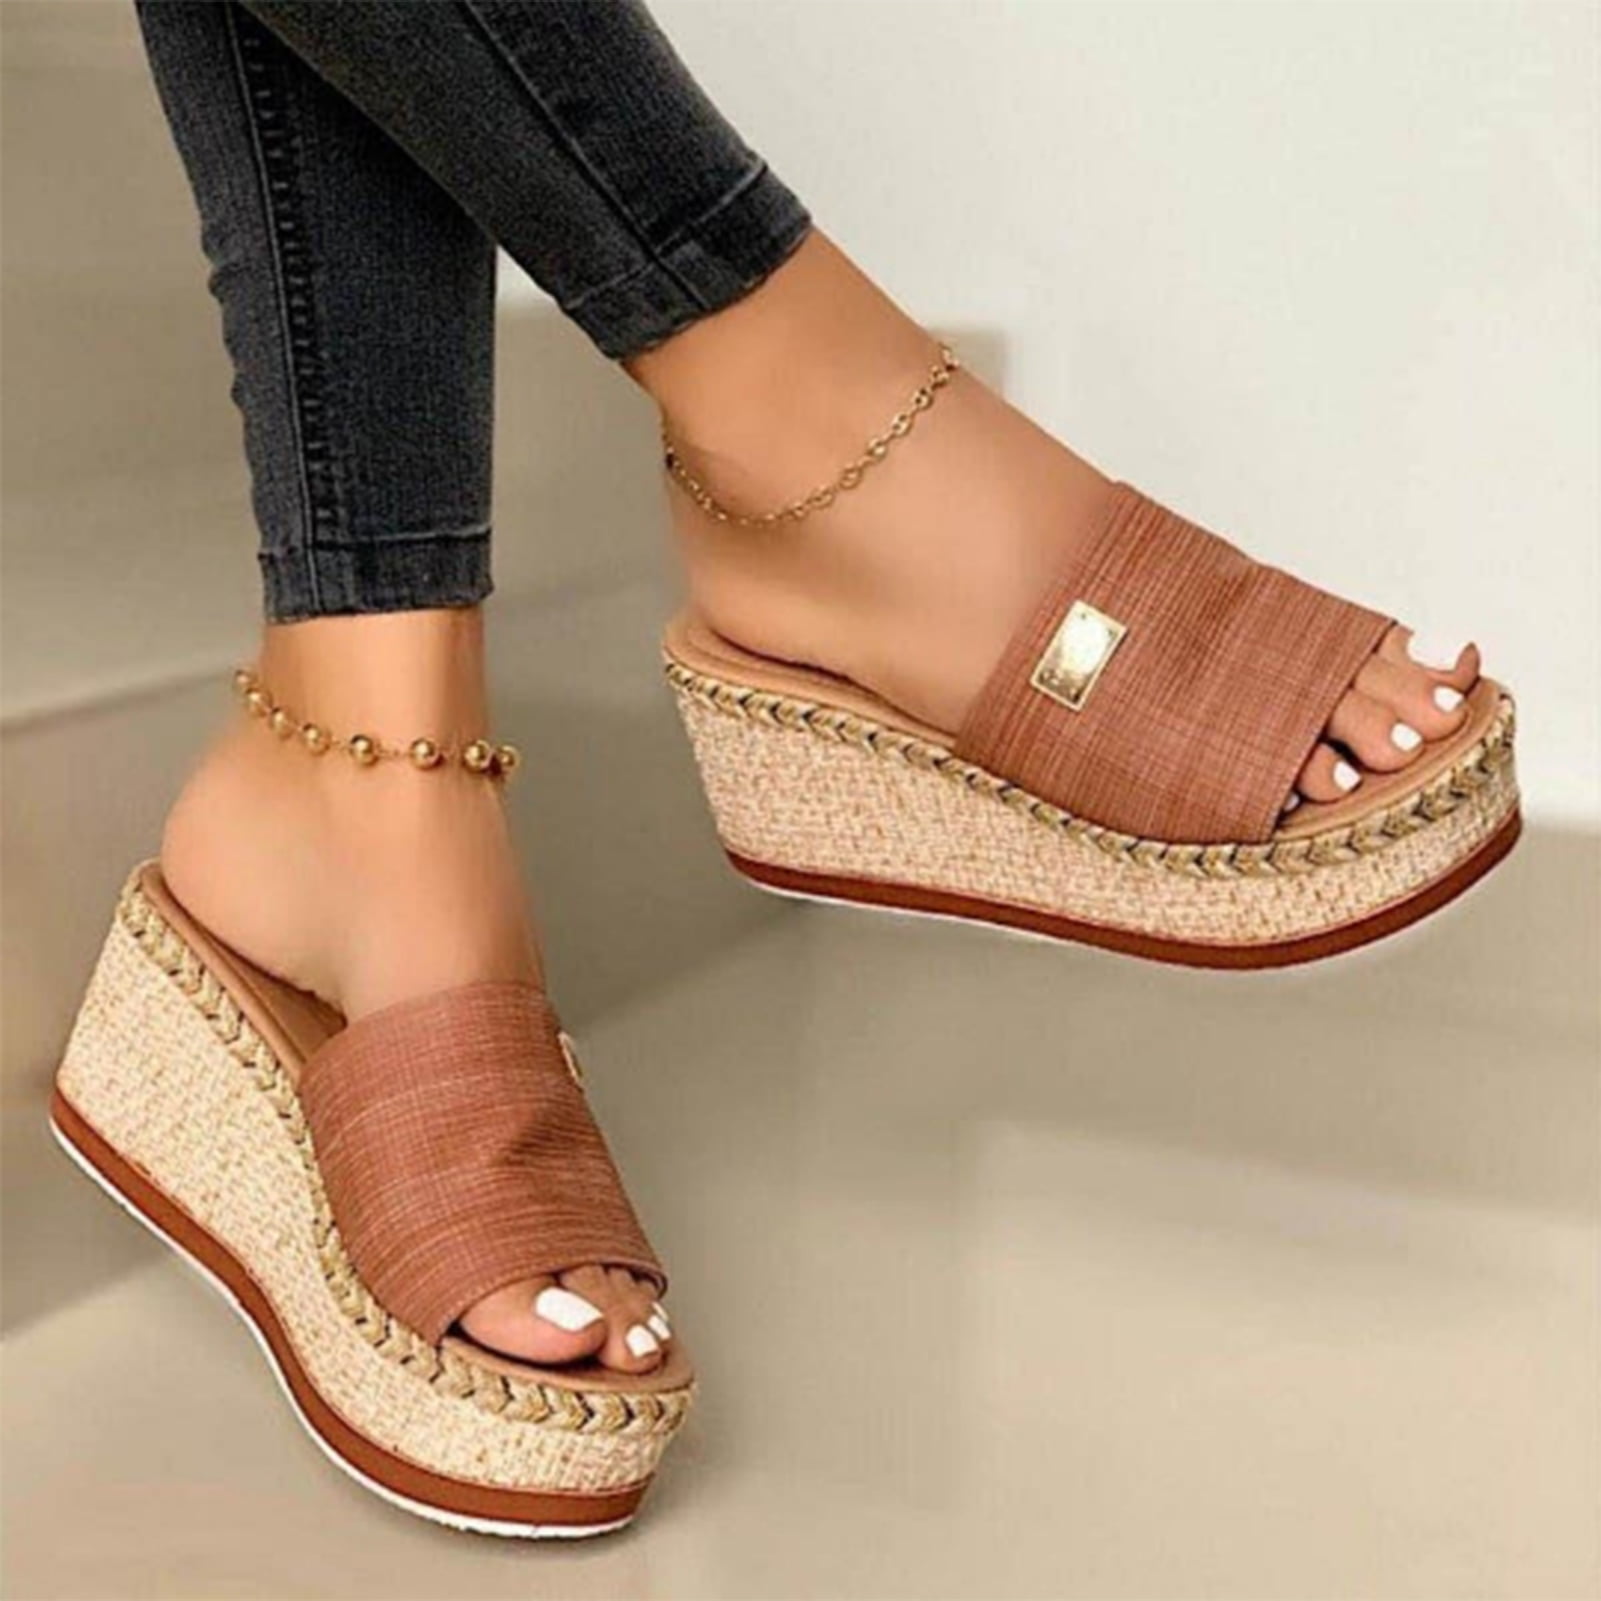 Details about   Sexy Womens Peep Toe Platform High Bloock Heel Ankle Strap Casual Sandals Shoes 